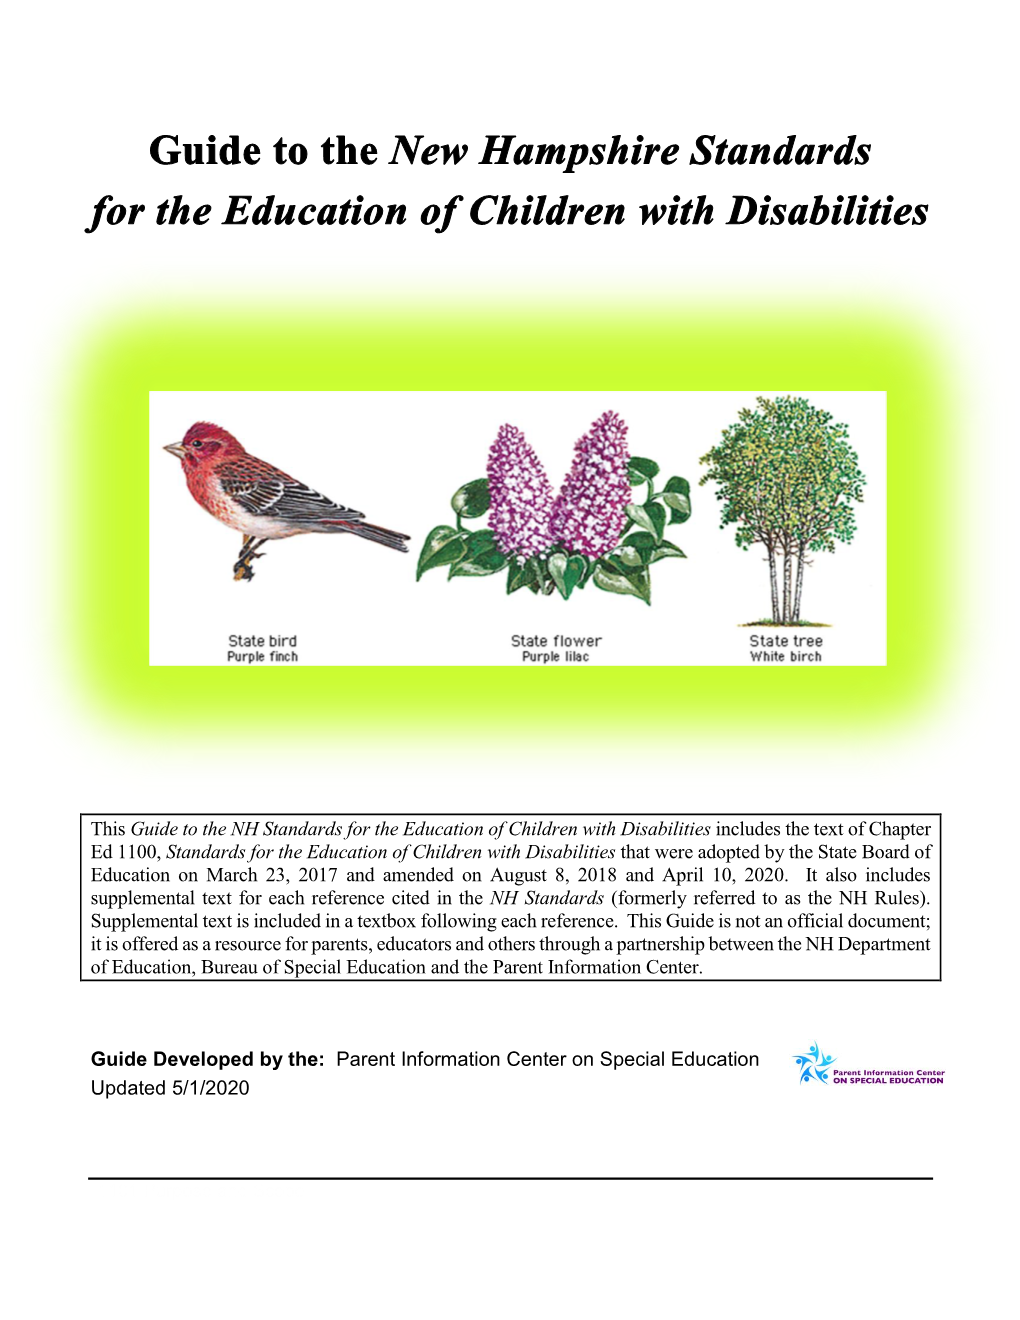 This Guide to the NH Standards for the Education of Children With